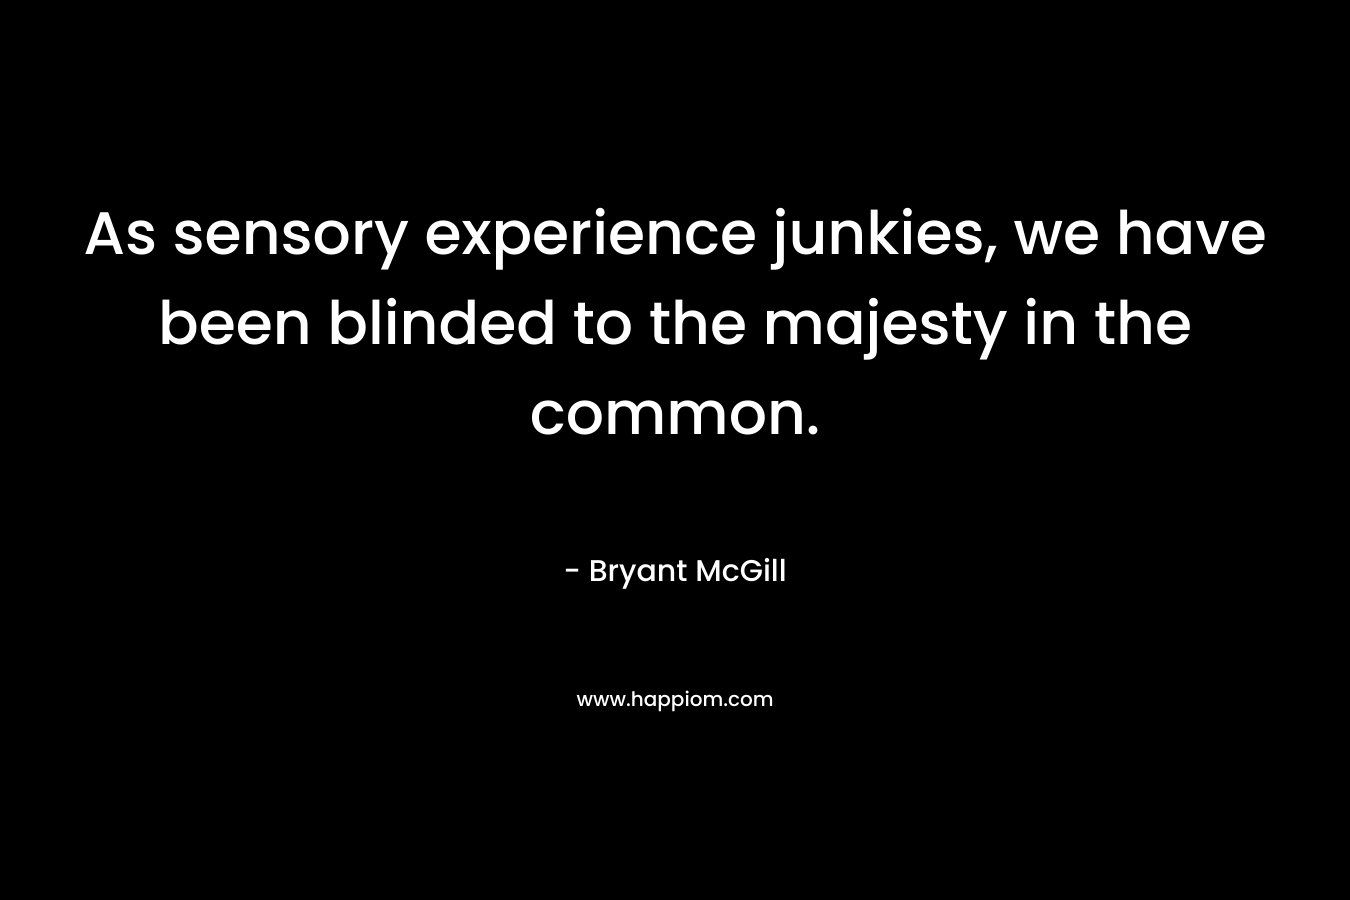 As sensory experience junkies, we have been blinded to the majesty in the common. – Bryant McGill